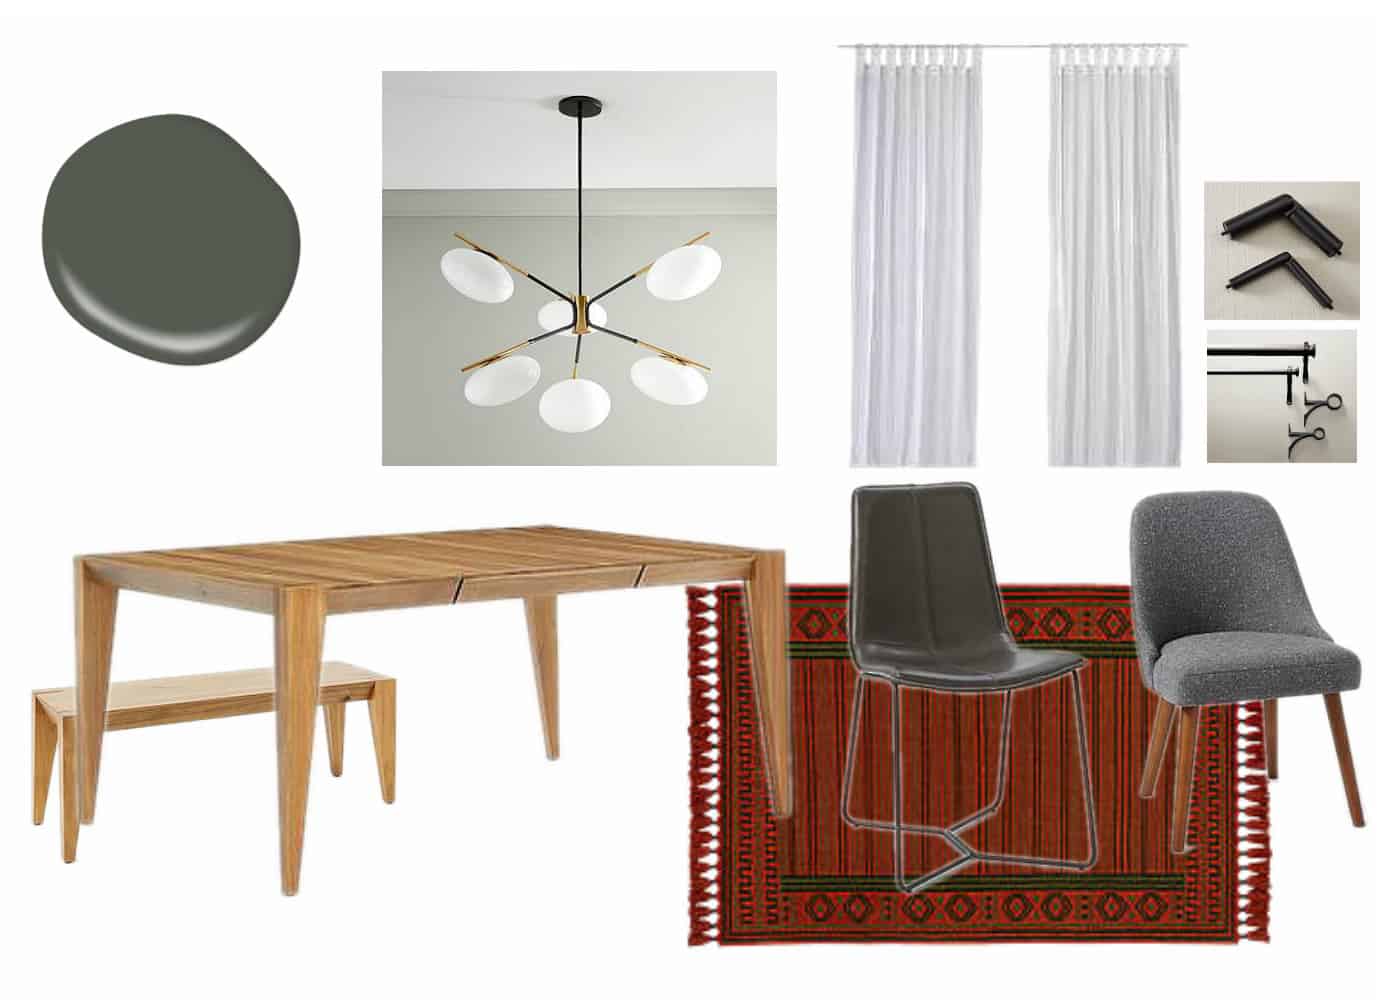 A collage of images showing all the different design elements of our dining room makeover, including the paint color, dining room table, chairs, rug, chandelier, and curtains.